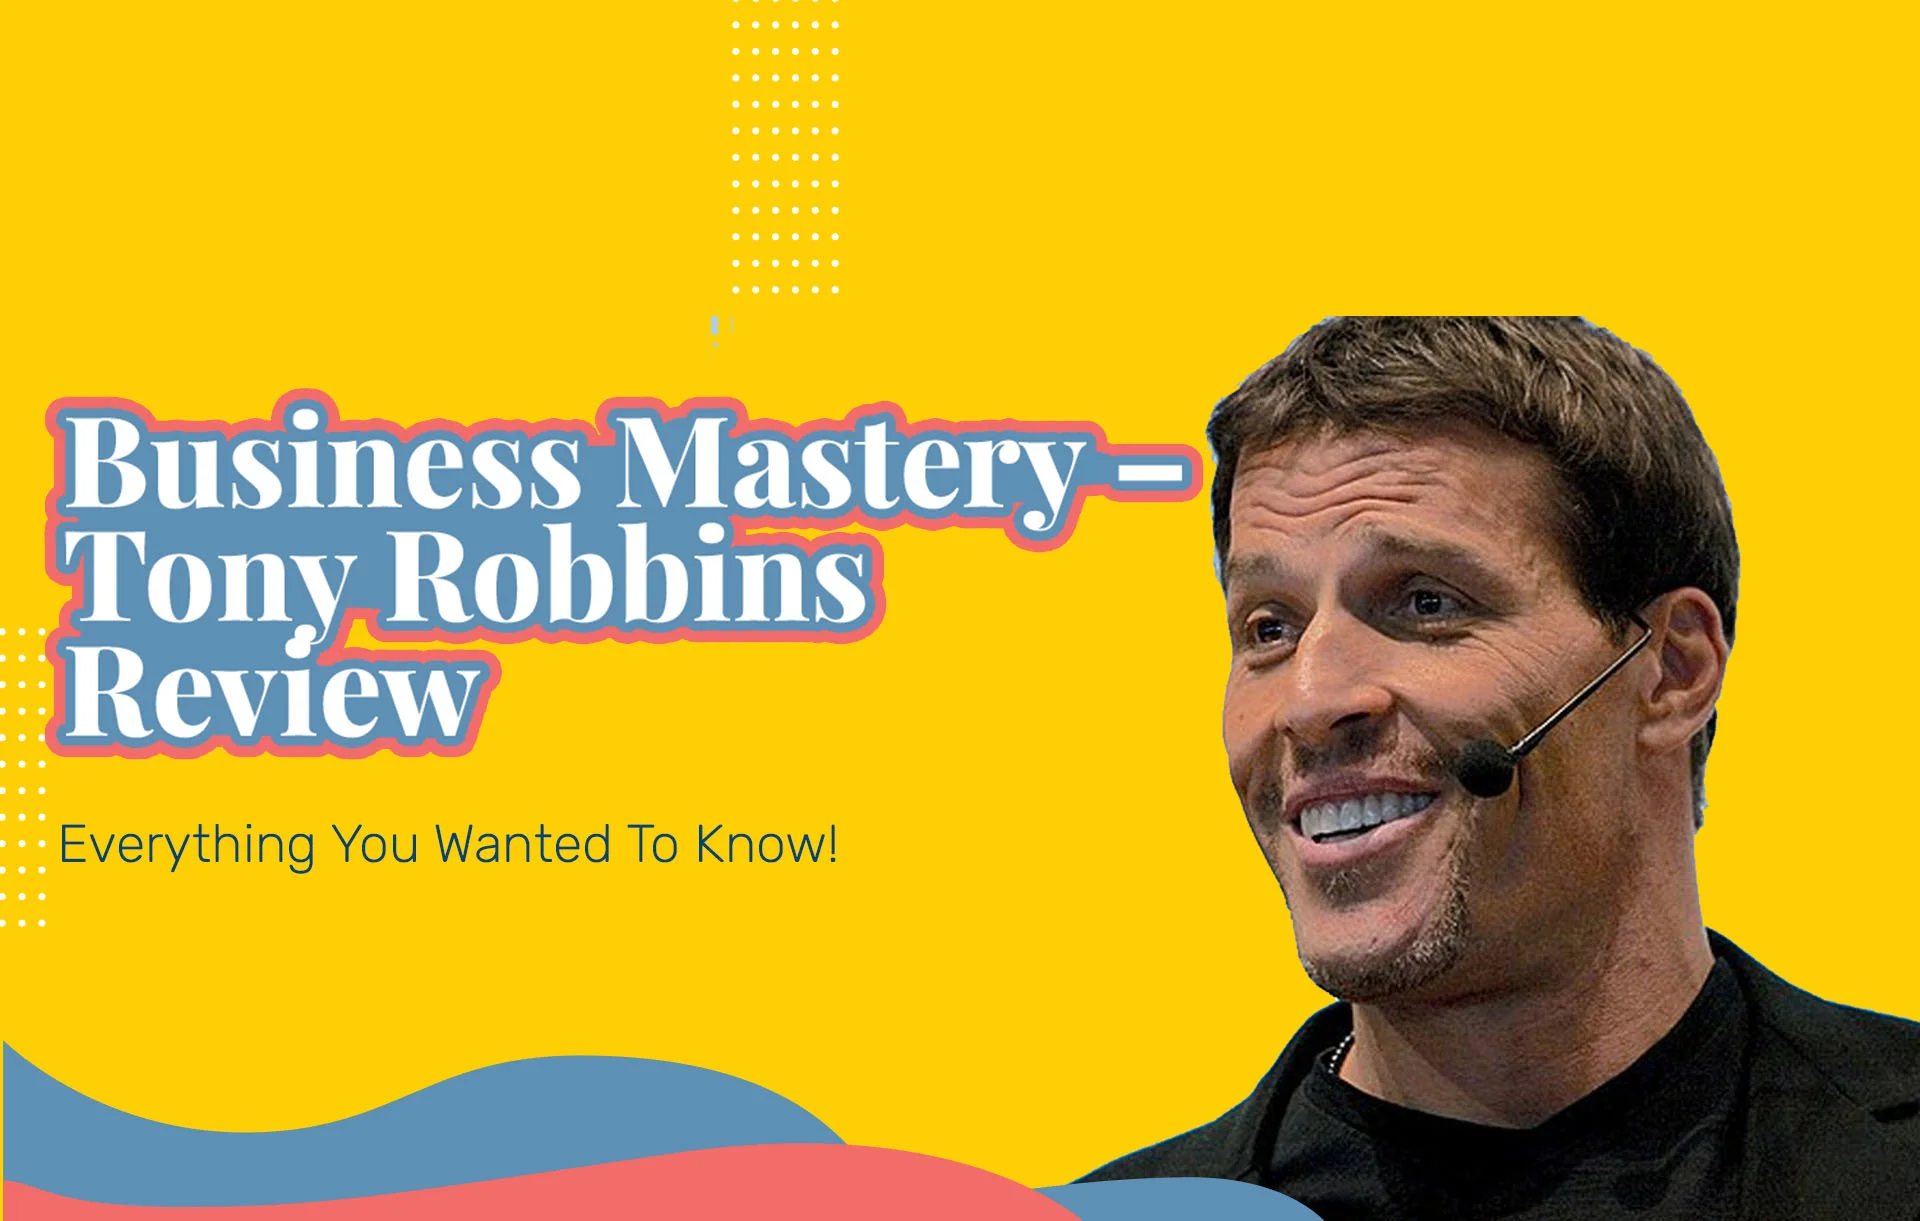 Business Mastery Reviews